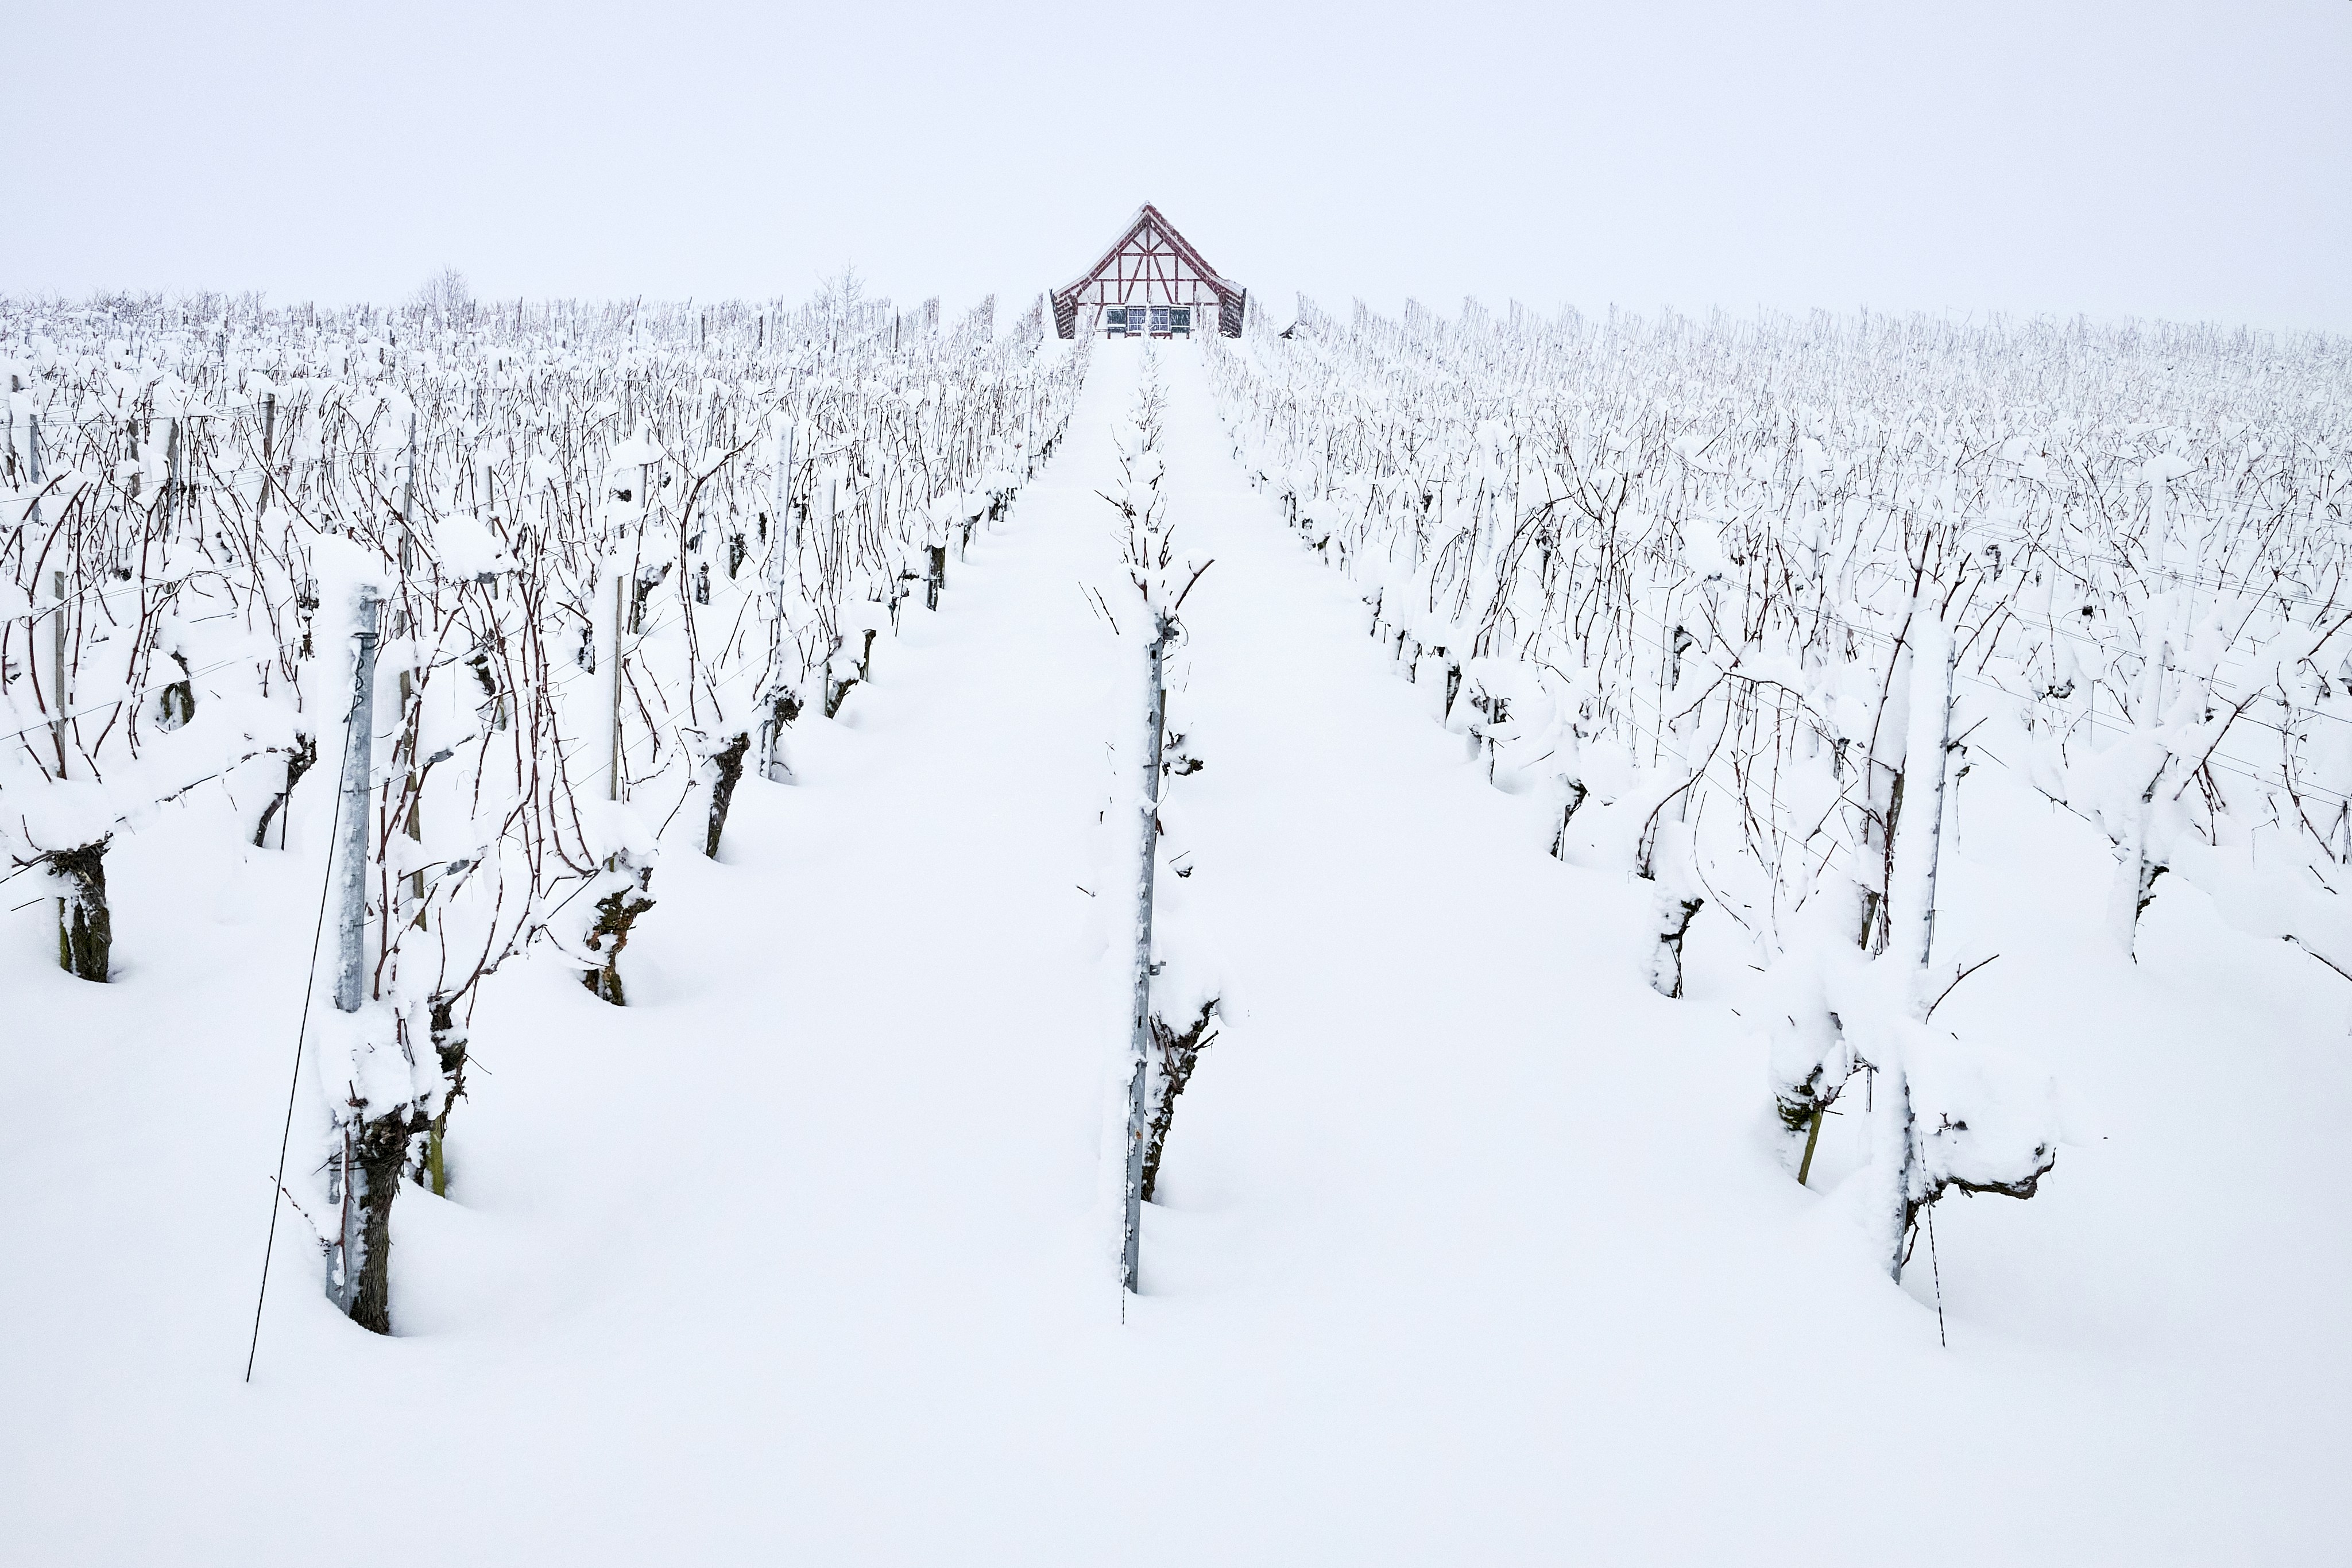 Wineyard fully covered with snow. Full whiteout in snow flurry.